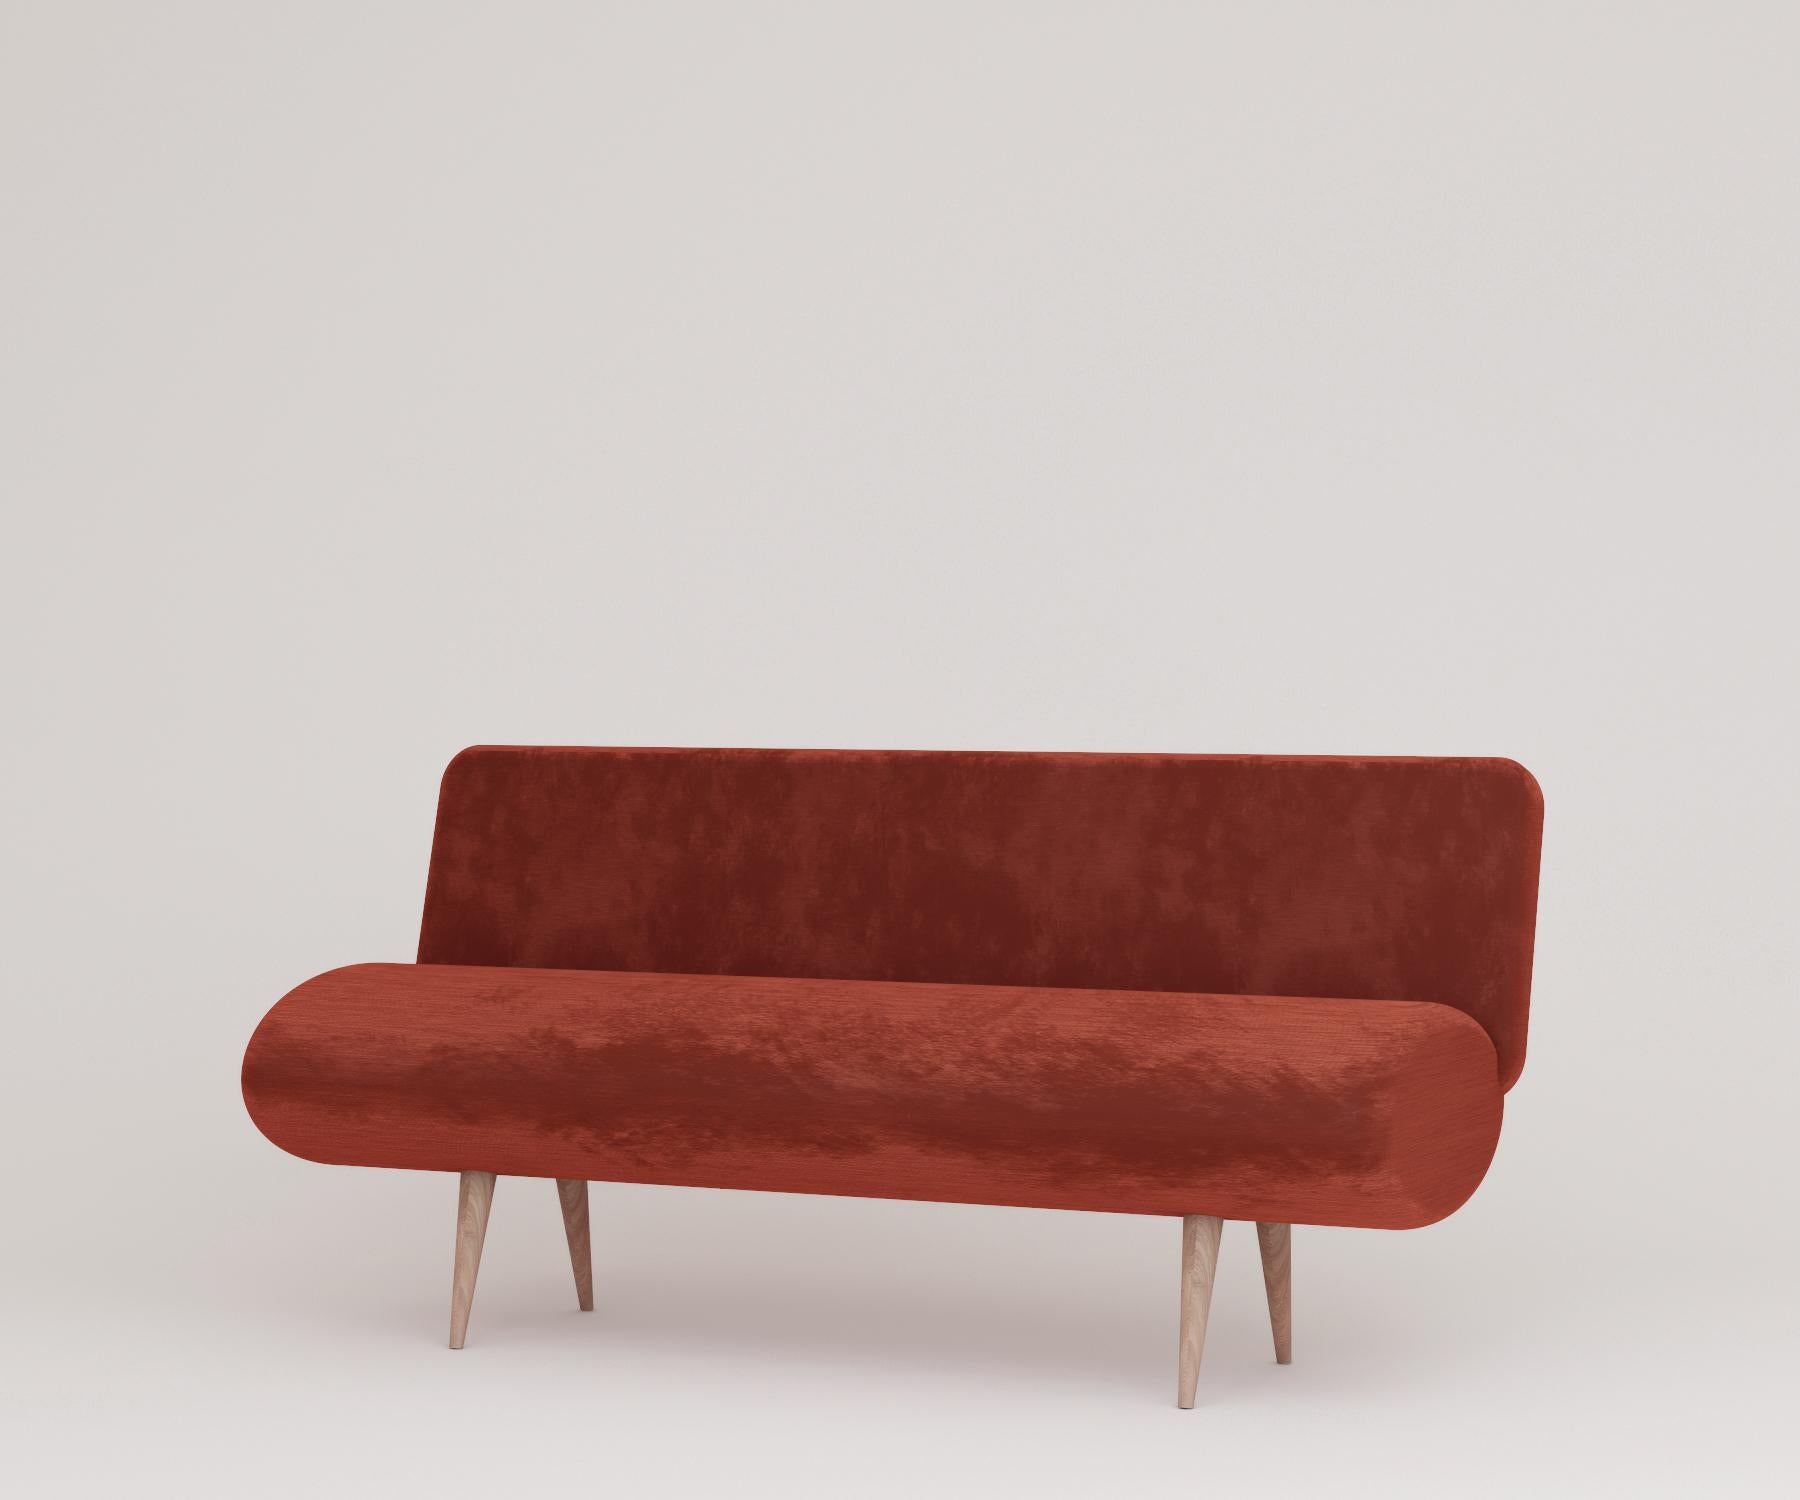 The cylinder sofa was inspired by the 60s style and made from mohair velvet
with walnut legs.

Dimension. W 145 x D 50 x H 45 cm
Material. Mohair velvet, walnut legs.
  